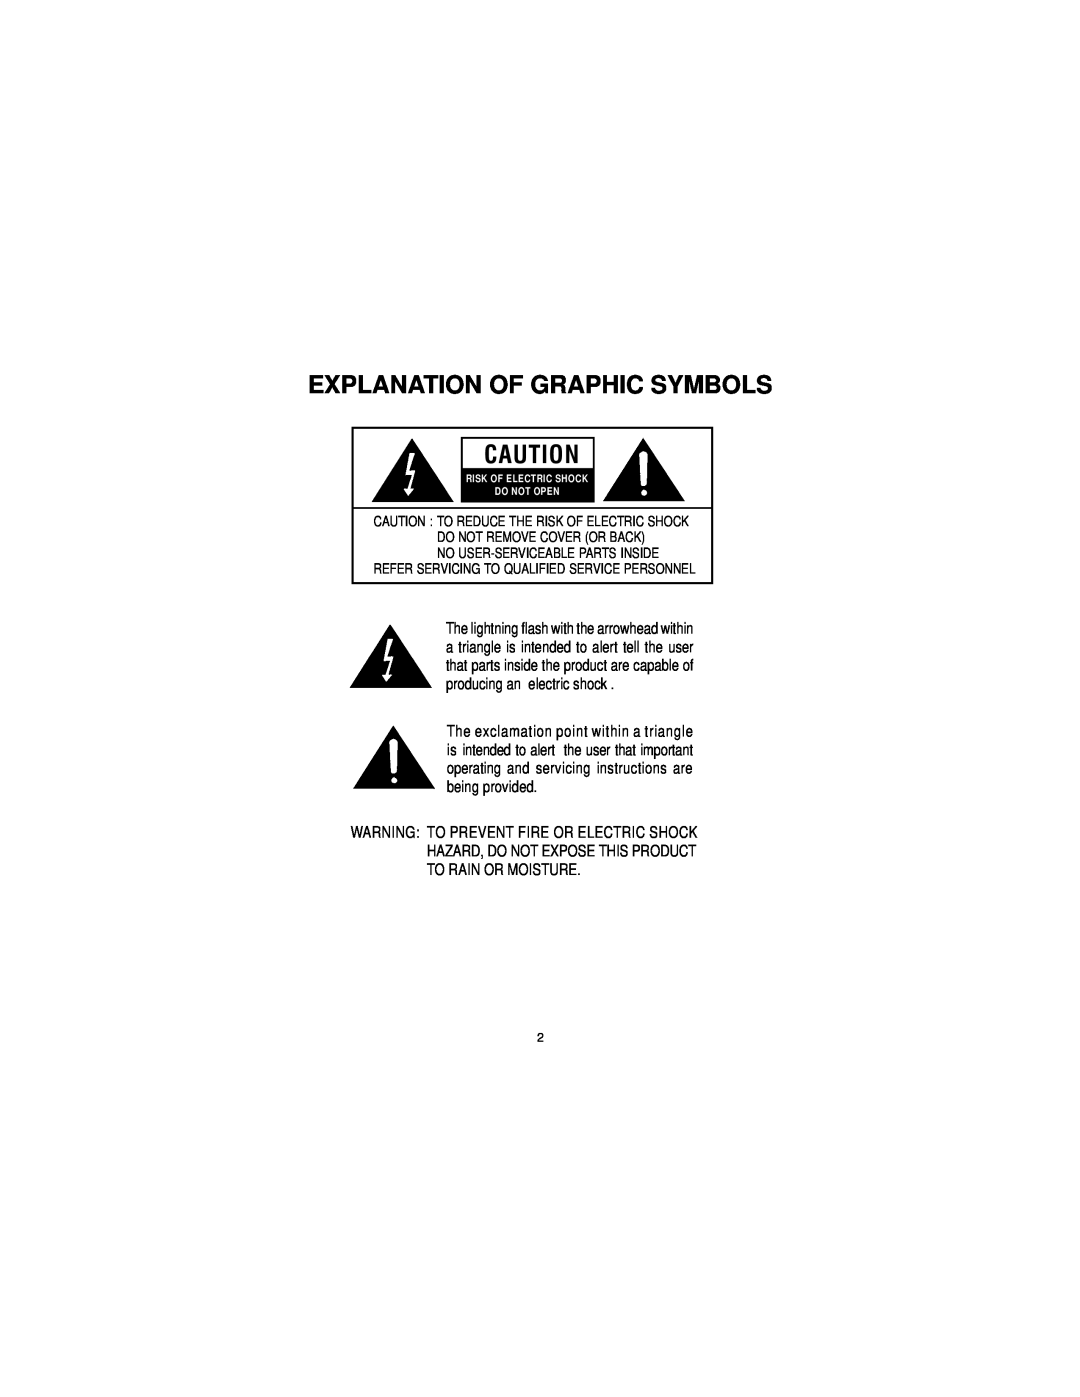 Audiovox LCM4000 manual Explanation Of Graphic Symbols, Risk Of Electric Shock Do Not Open 